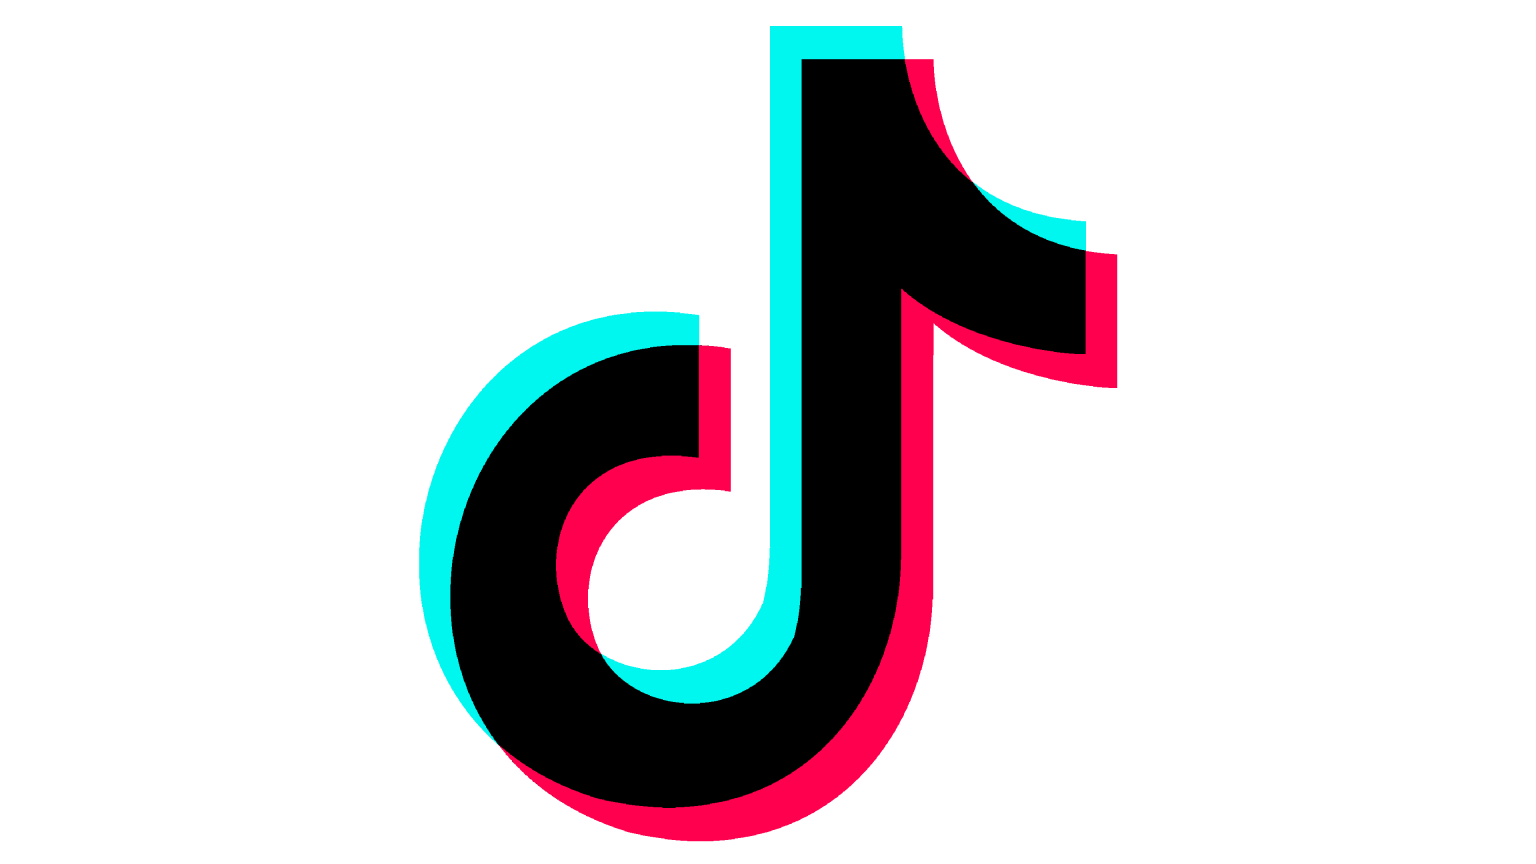 Tiktok Logo And Symbol Meaning History Sign